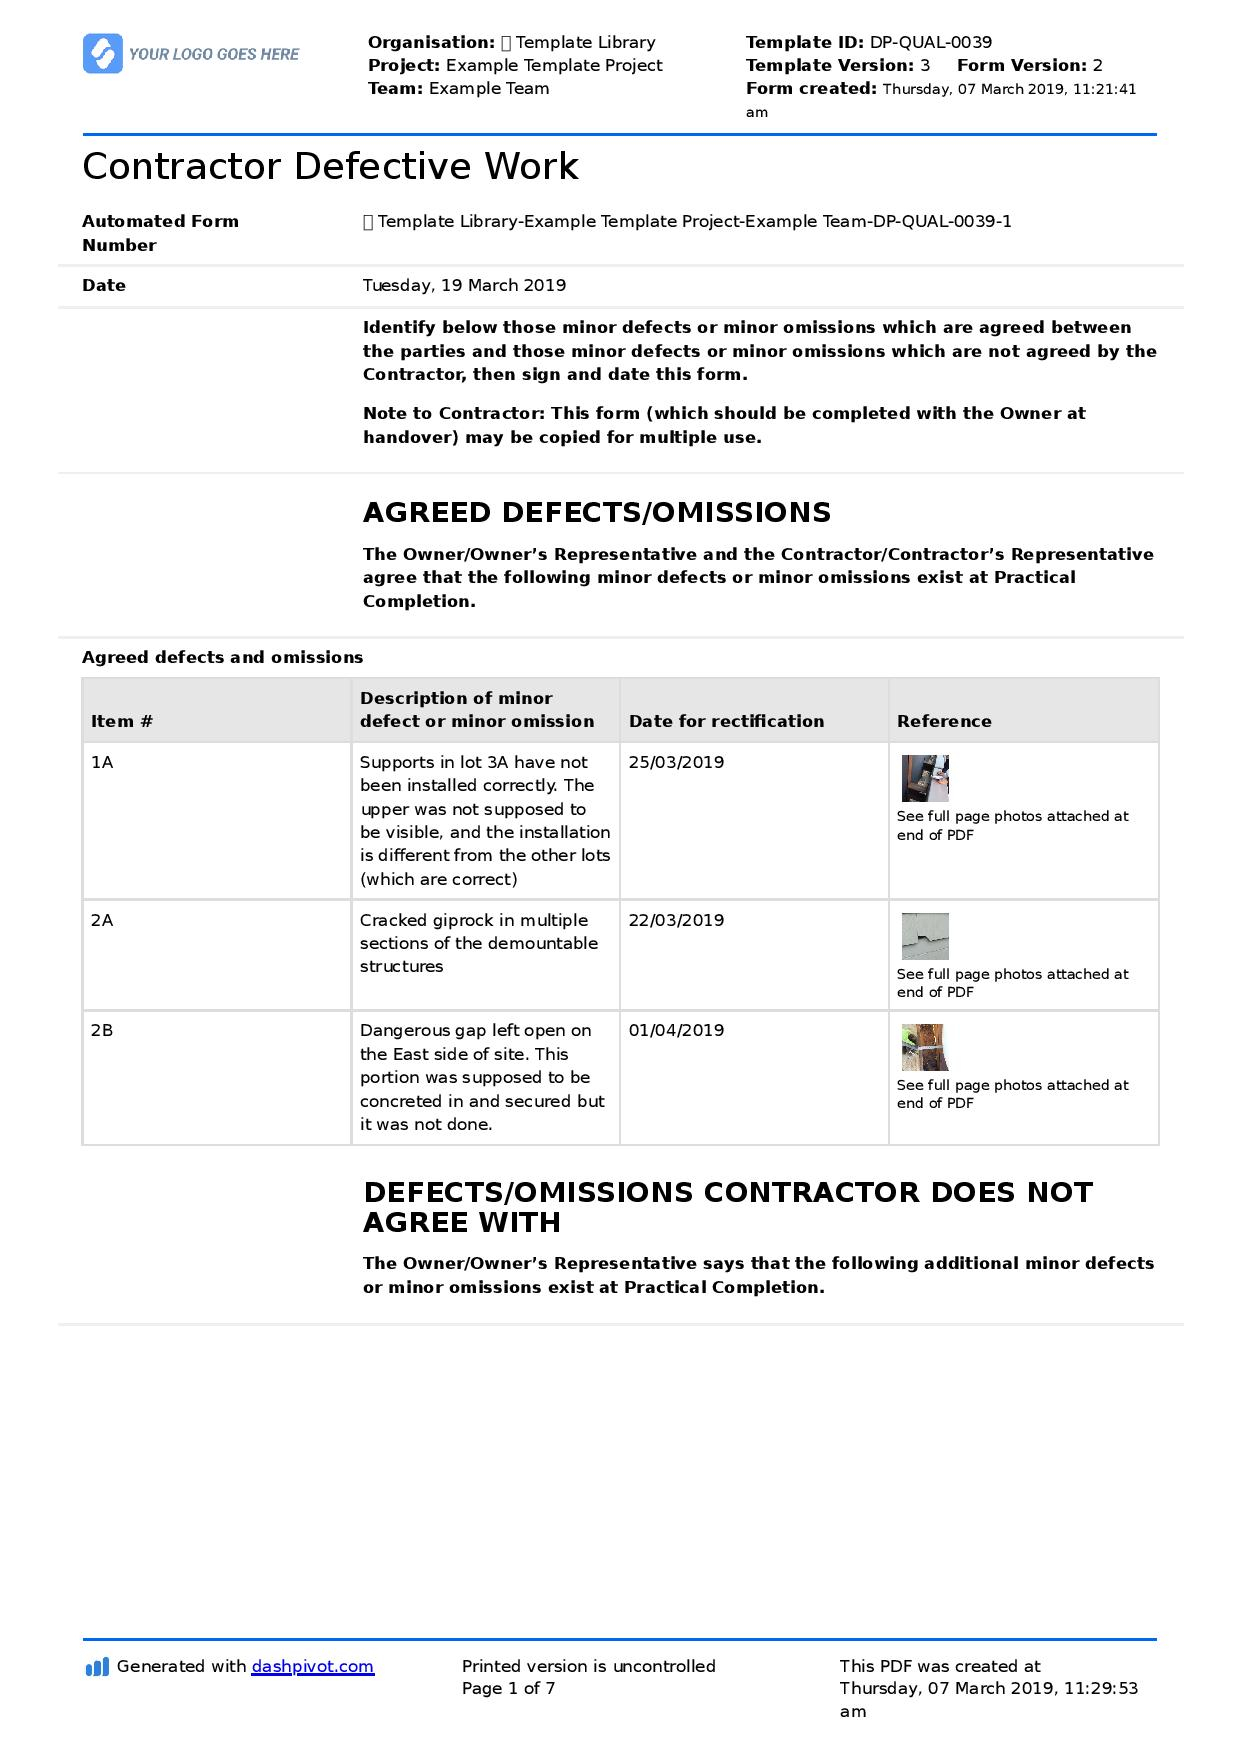 Letter To Contractor For Defective Work: Sample Letter And Intended For Building Defect Report Template